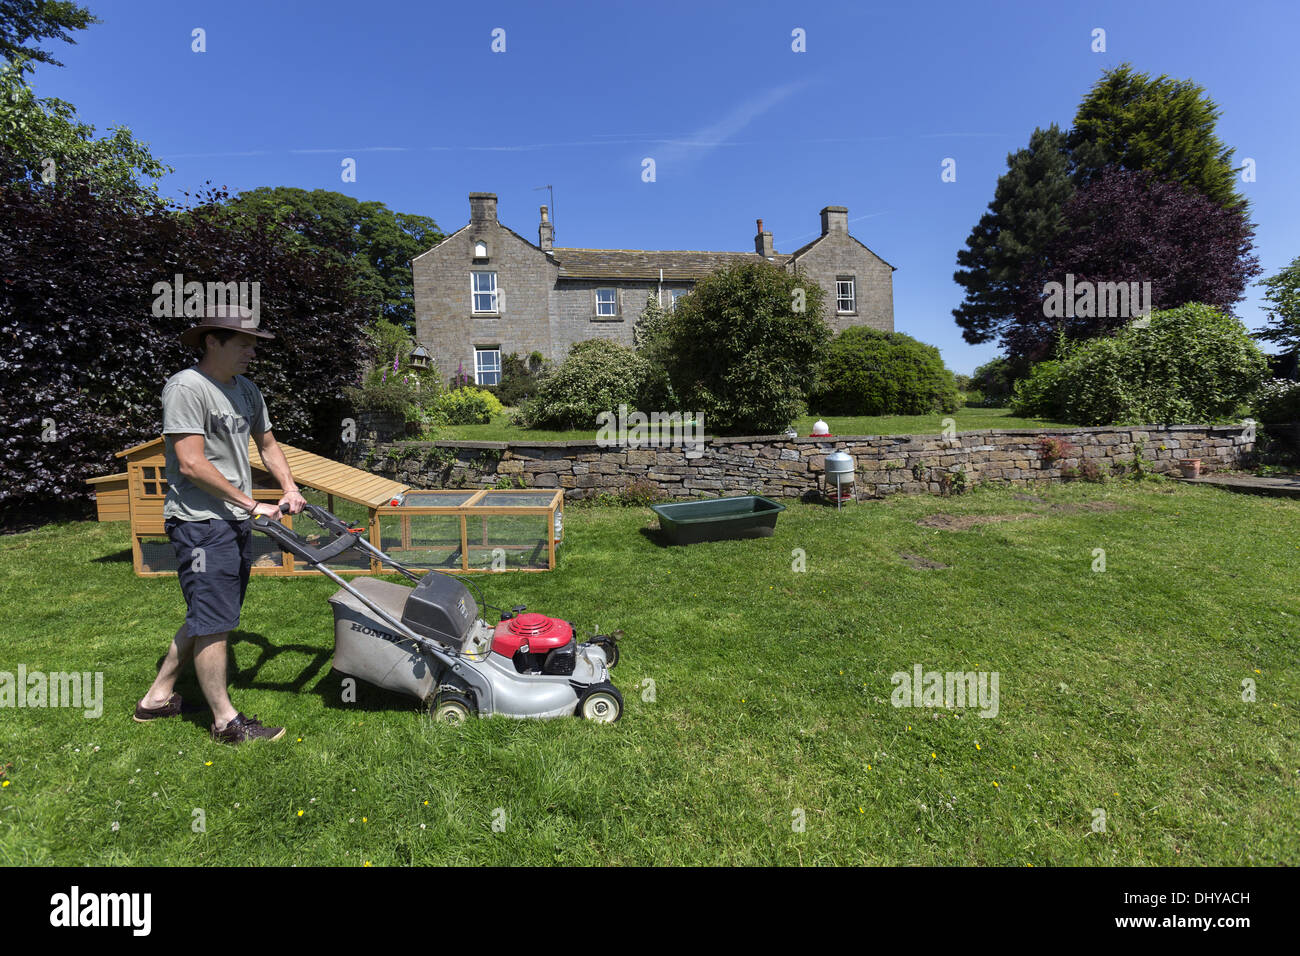 Man mowing the lawn in front of a large stone house Stock Photo